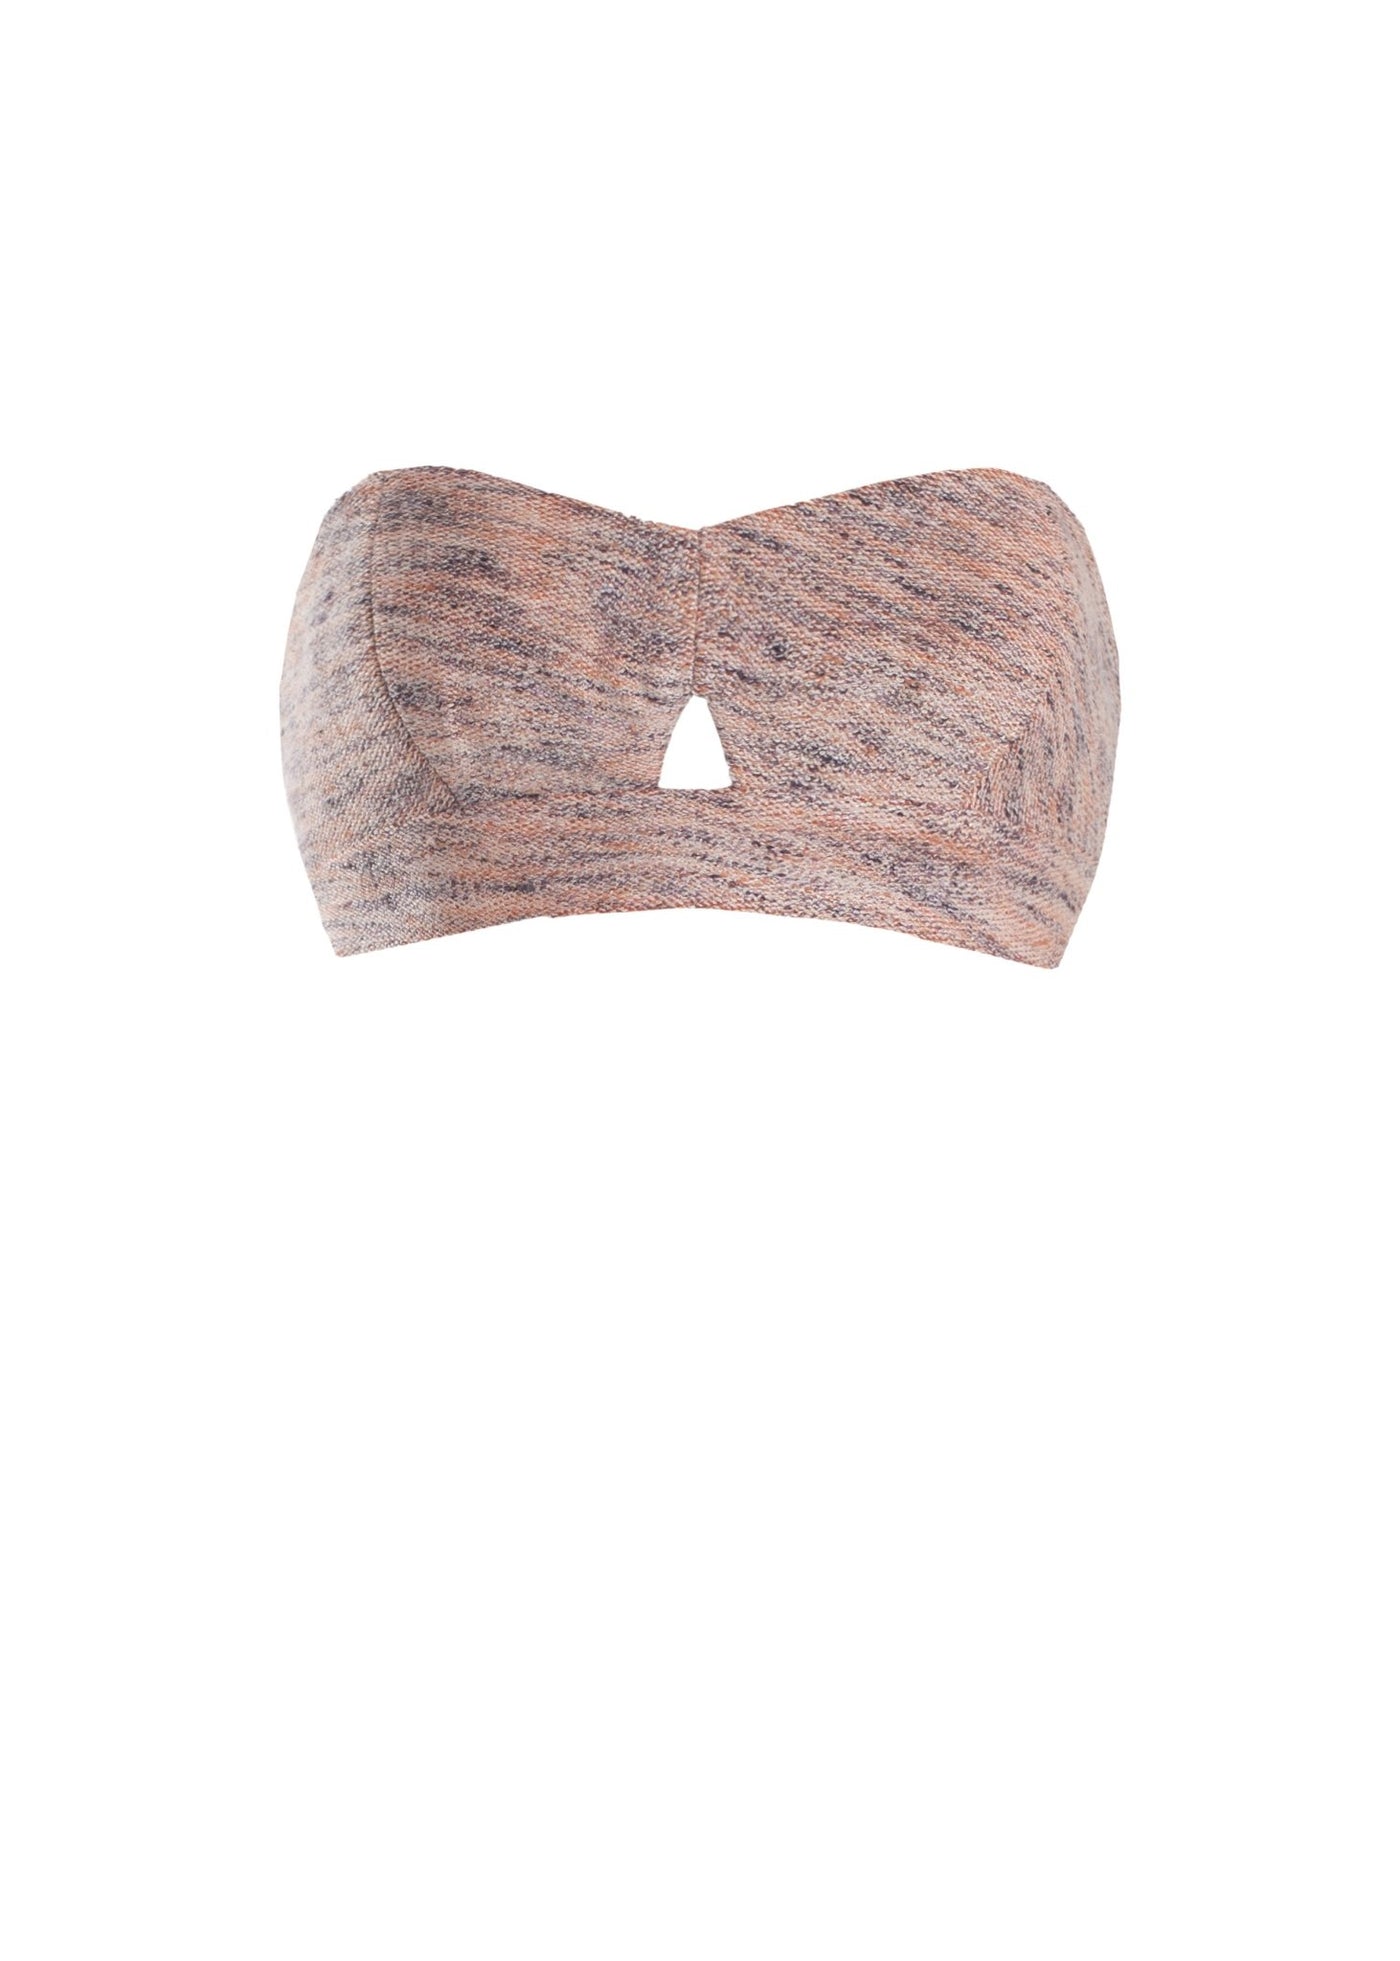 Orange Bandeau Top - The Clothing LoungeNOPIN